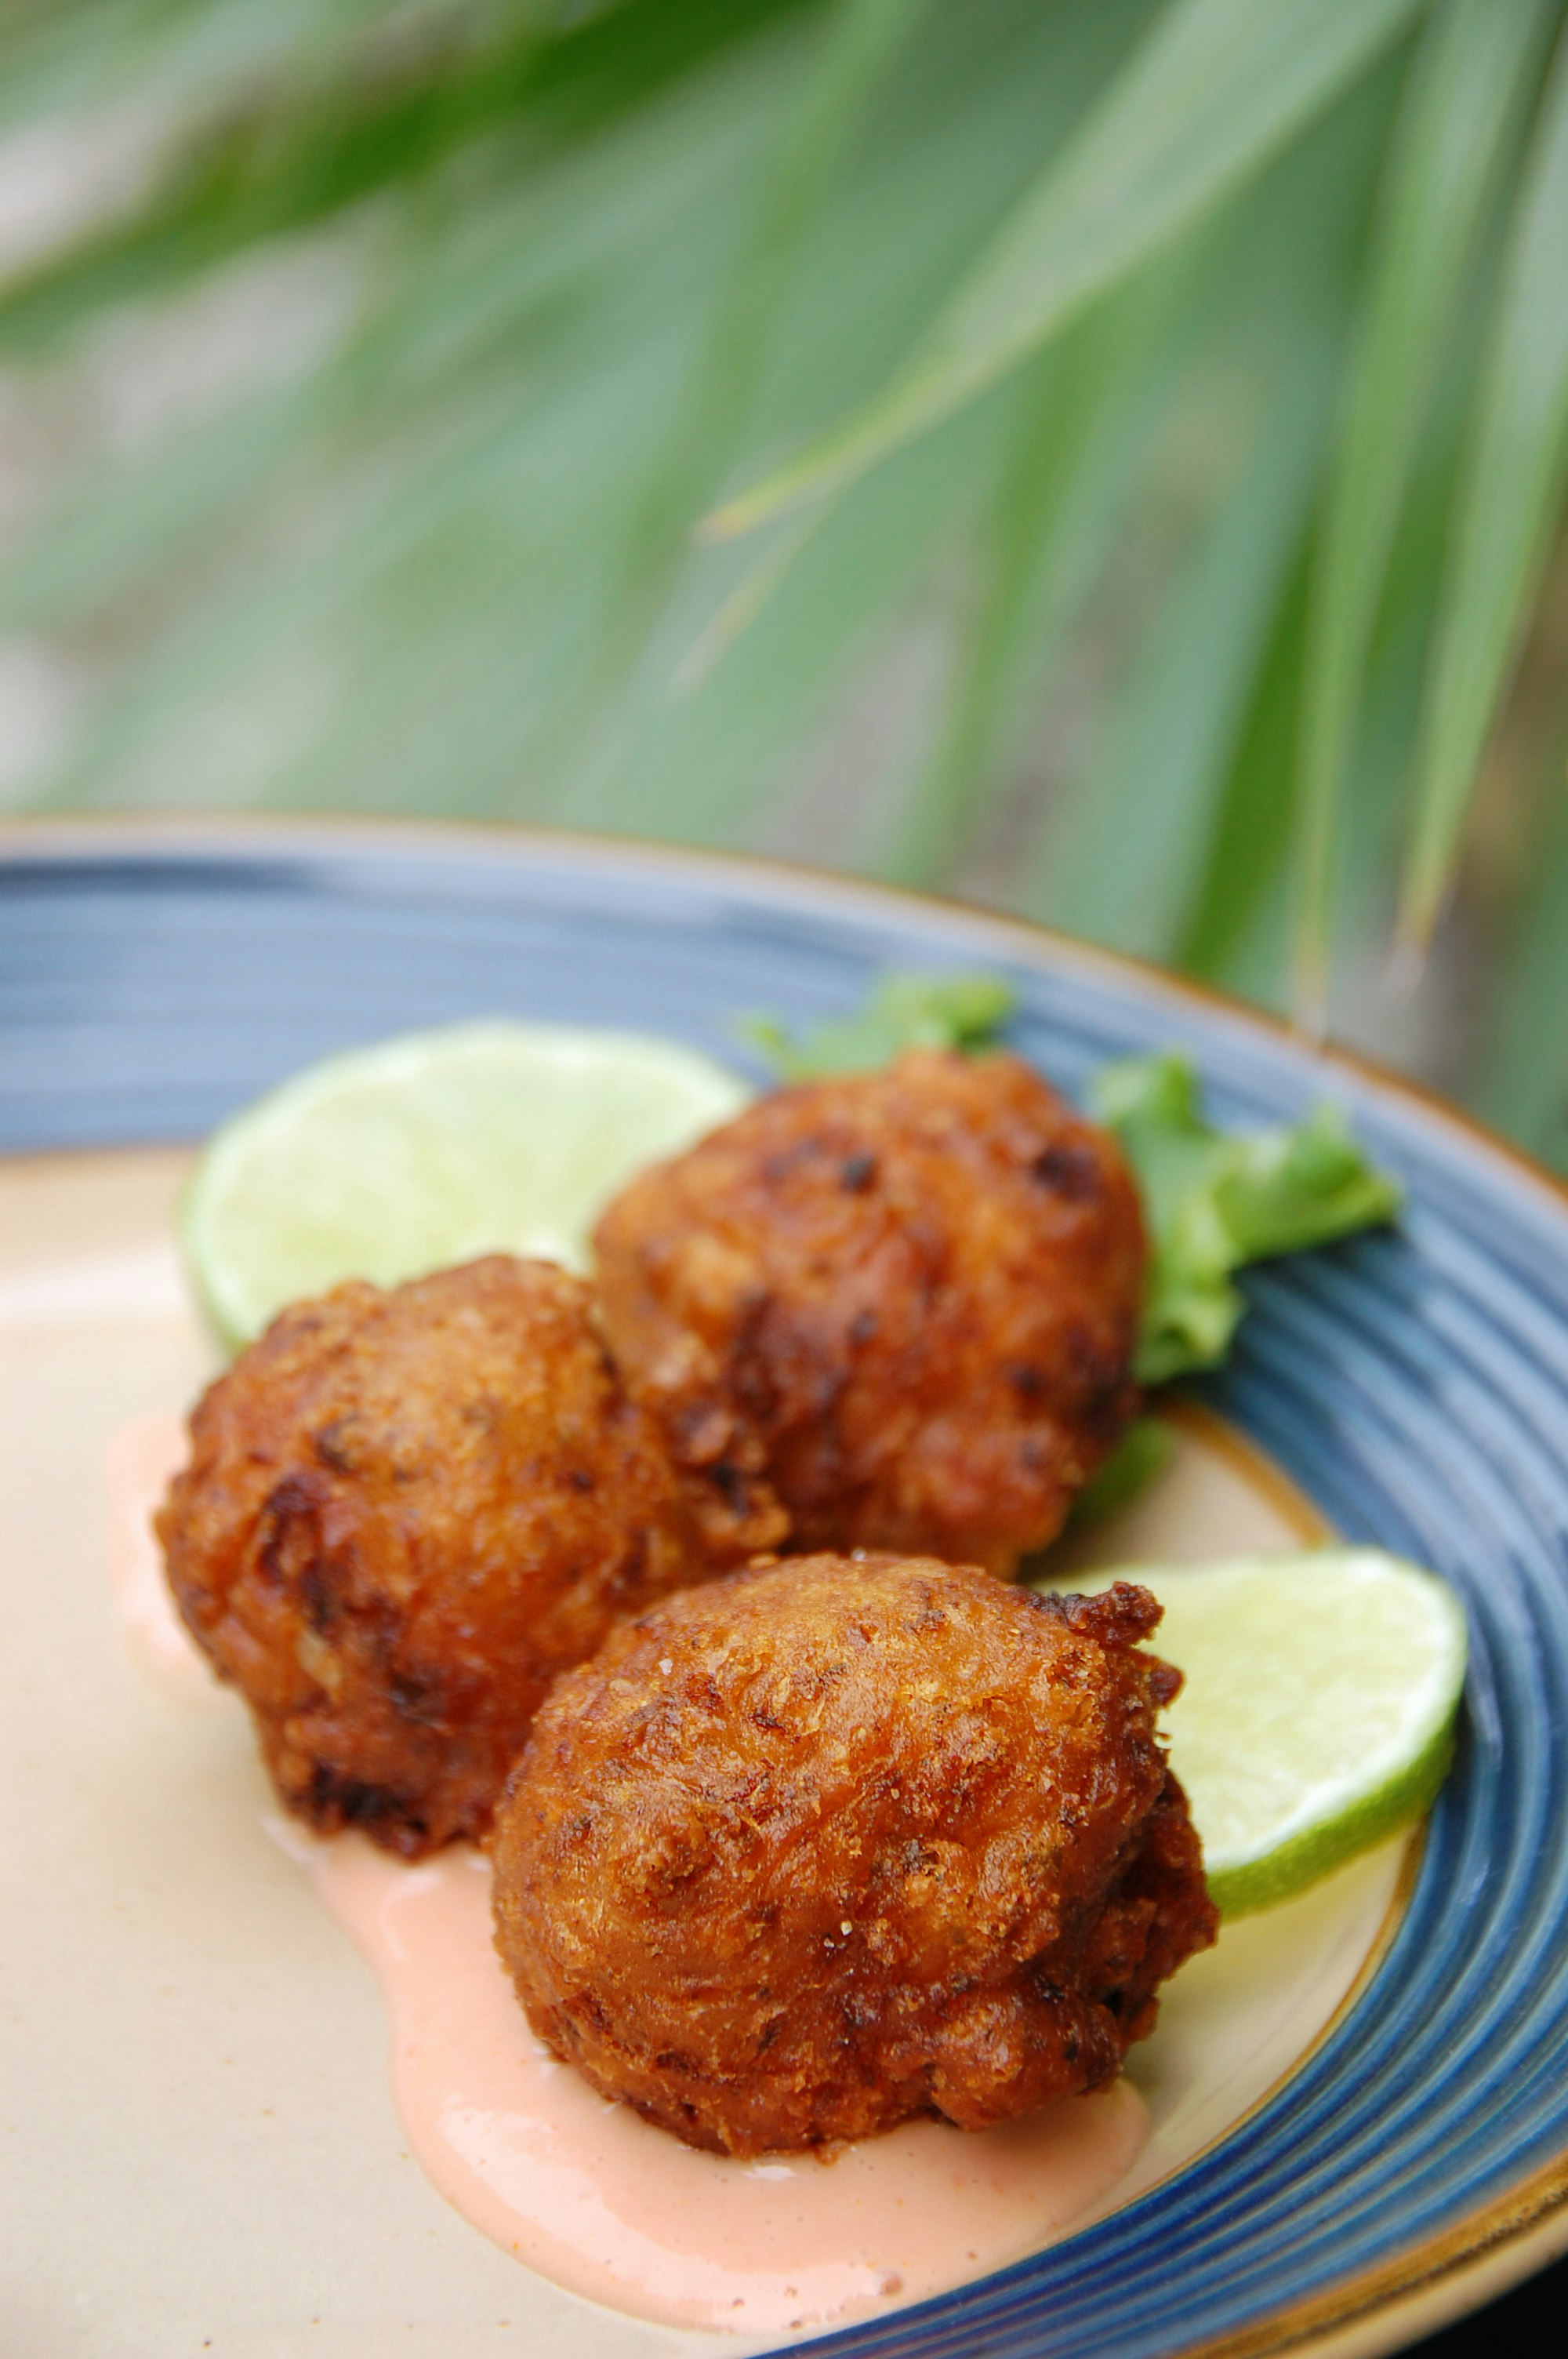 Three deep fried conch fritters, a specialty of the Florida Keys, served with lime and dipping sauce.